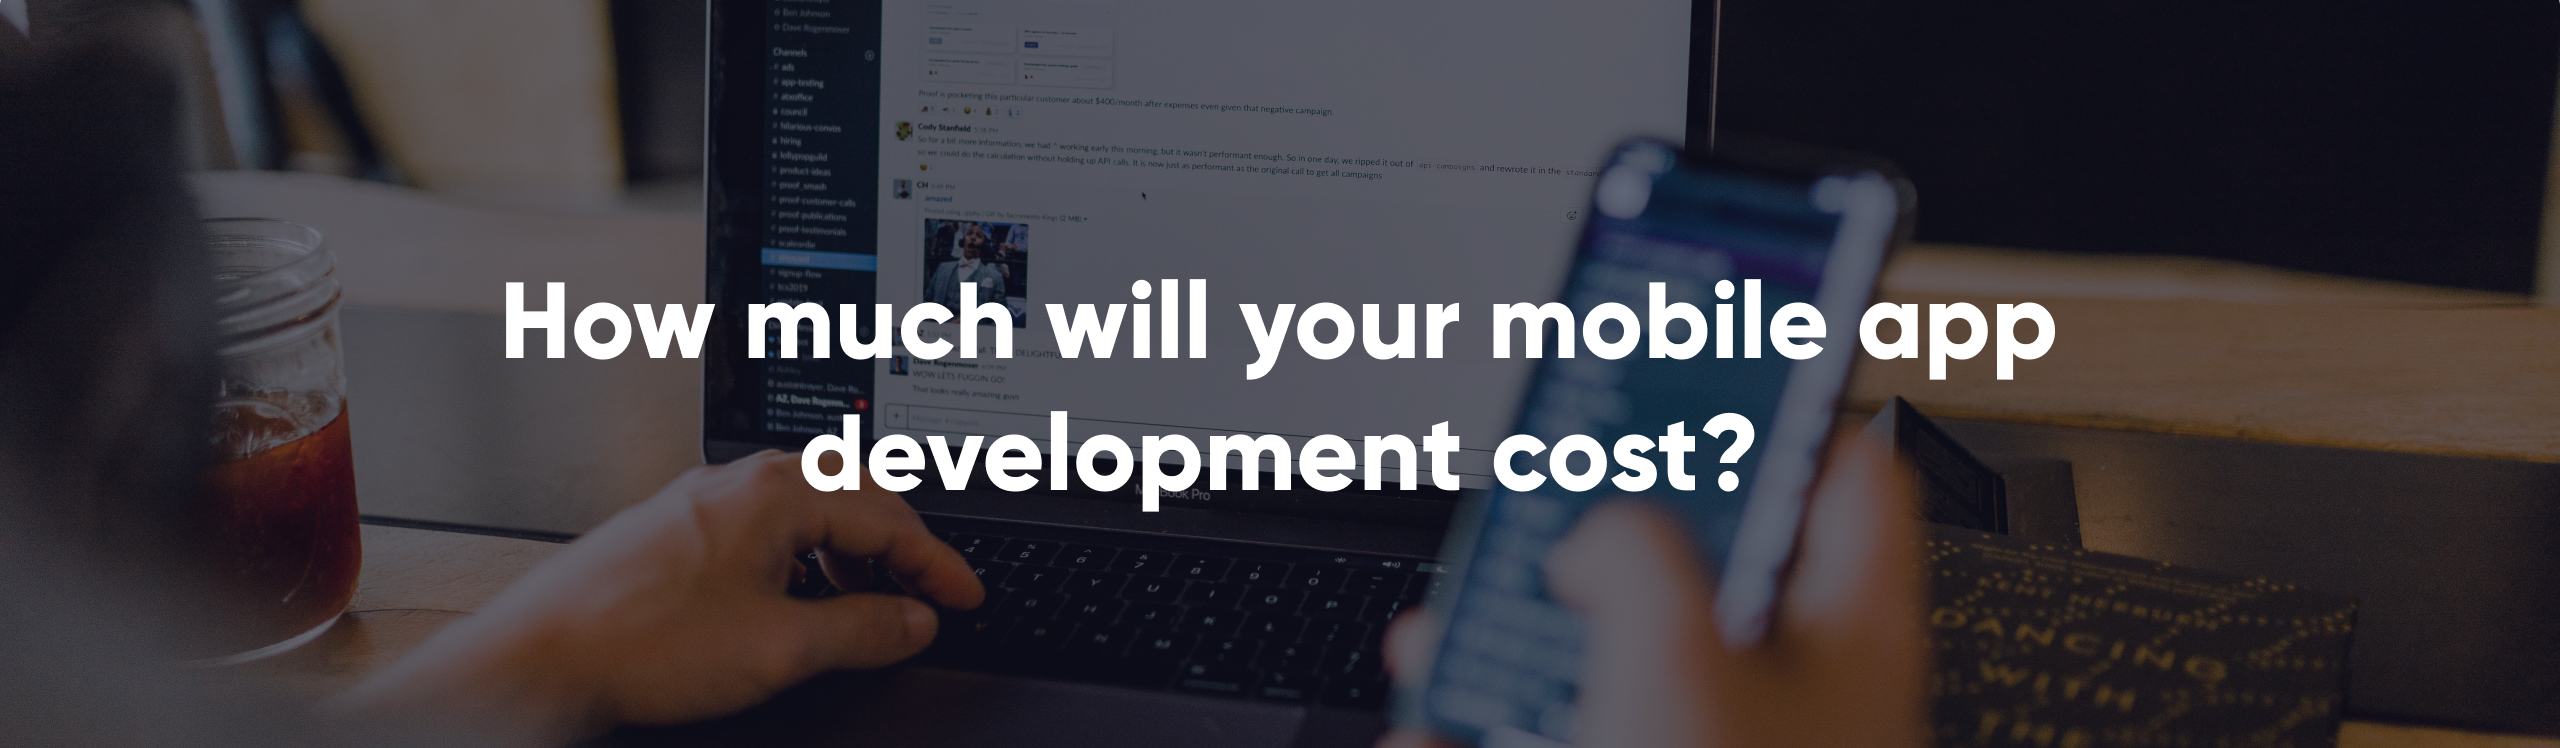 How much will your mobile app development cost?